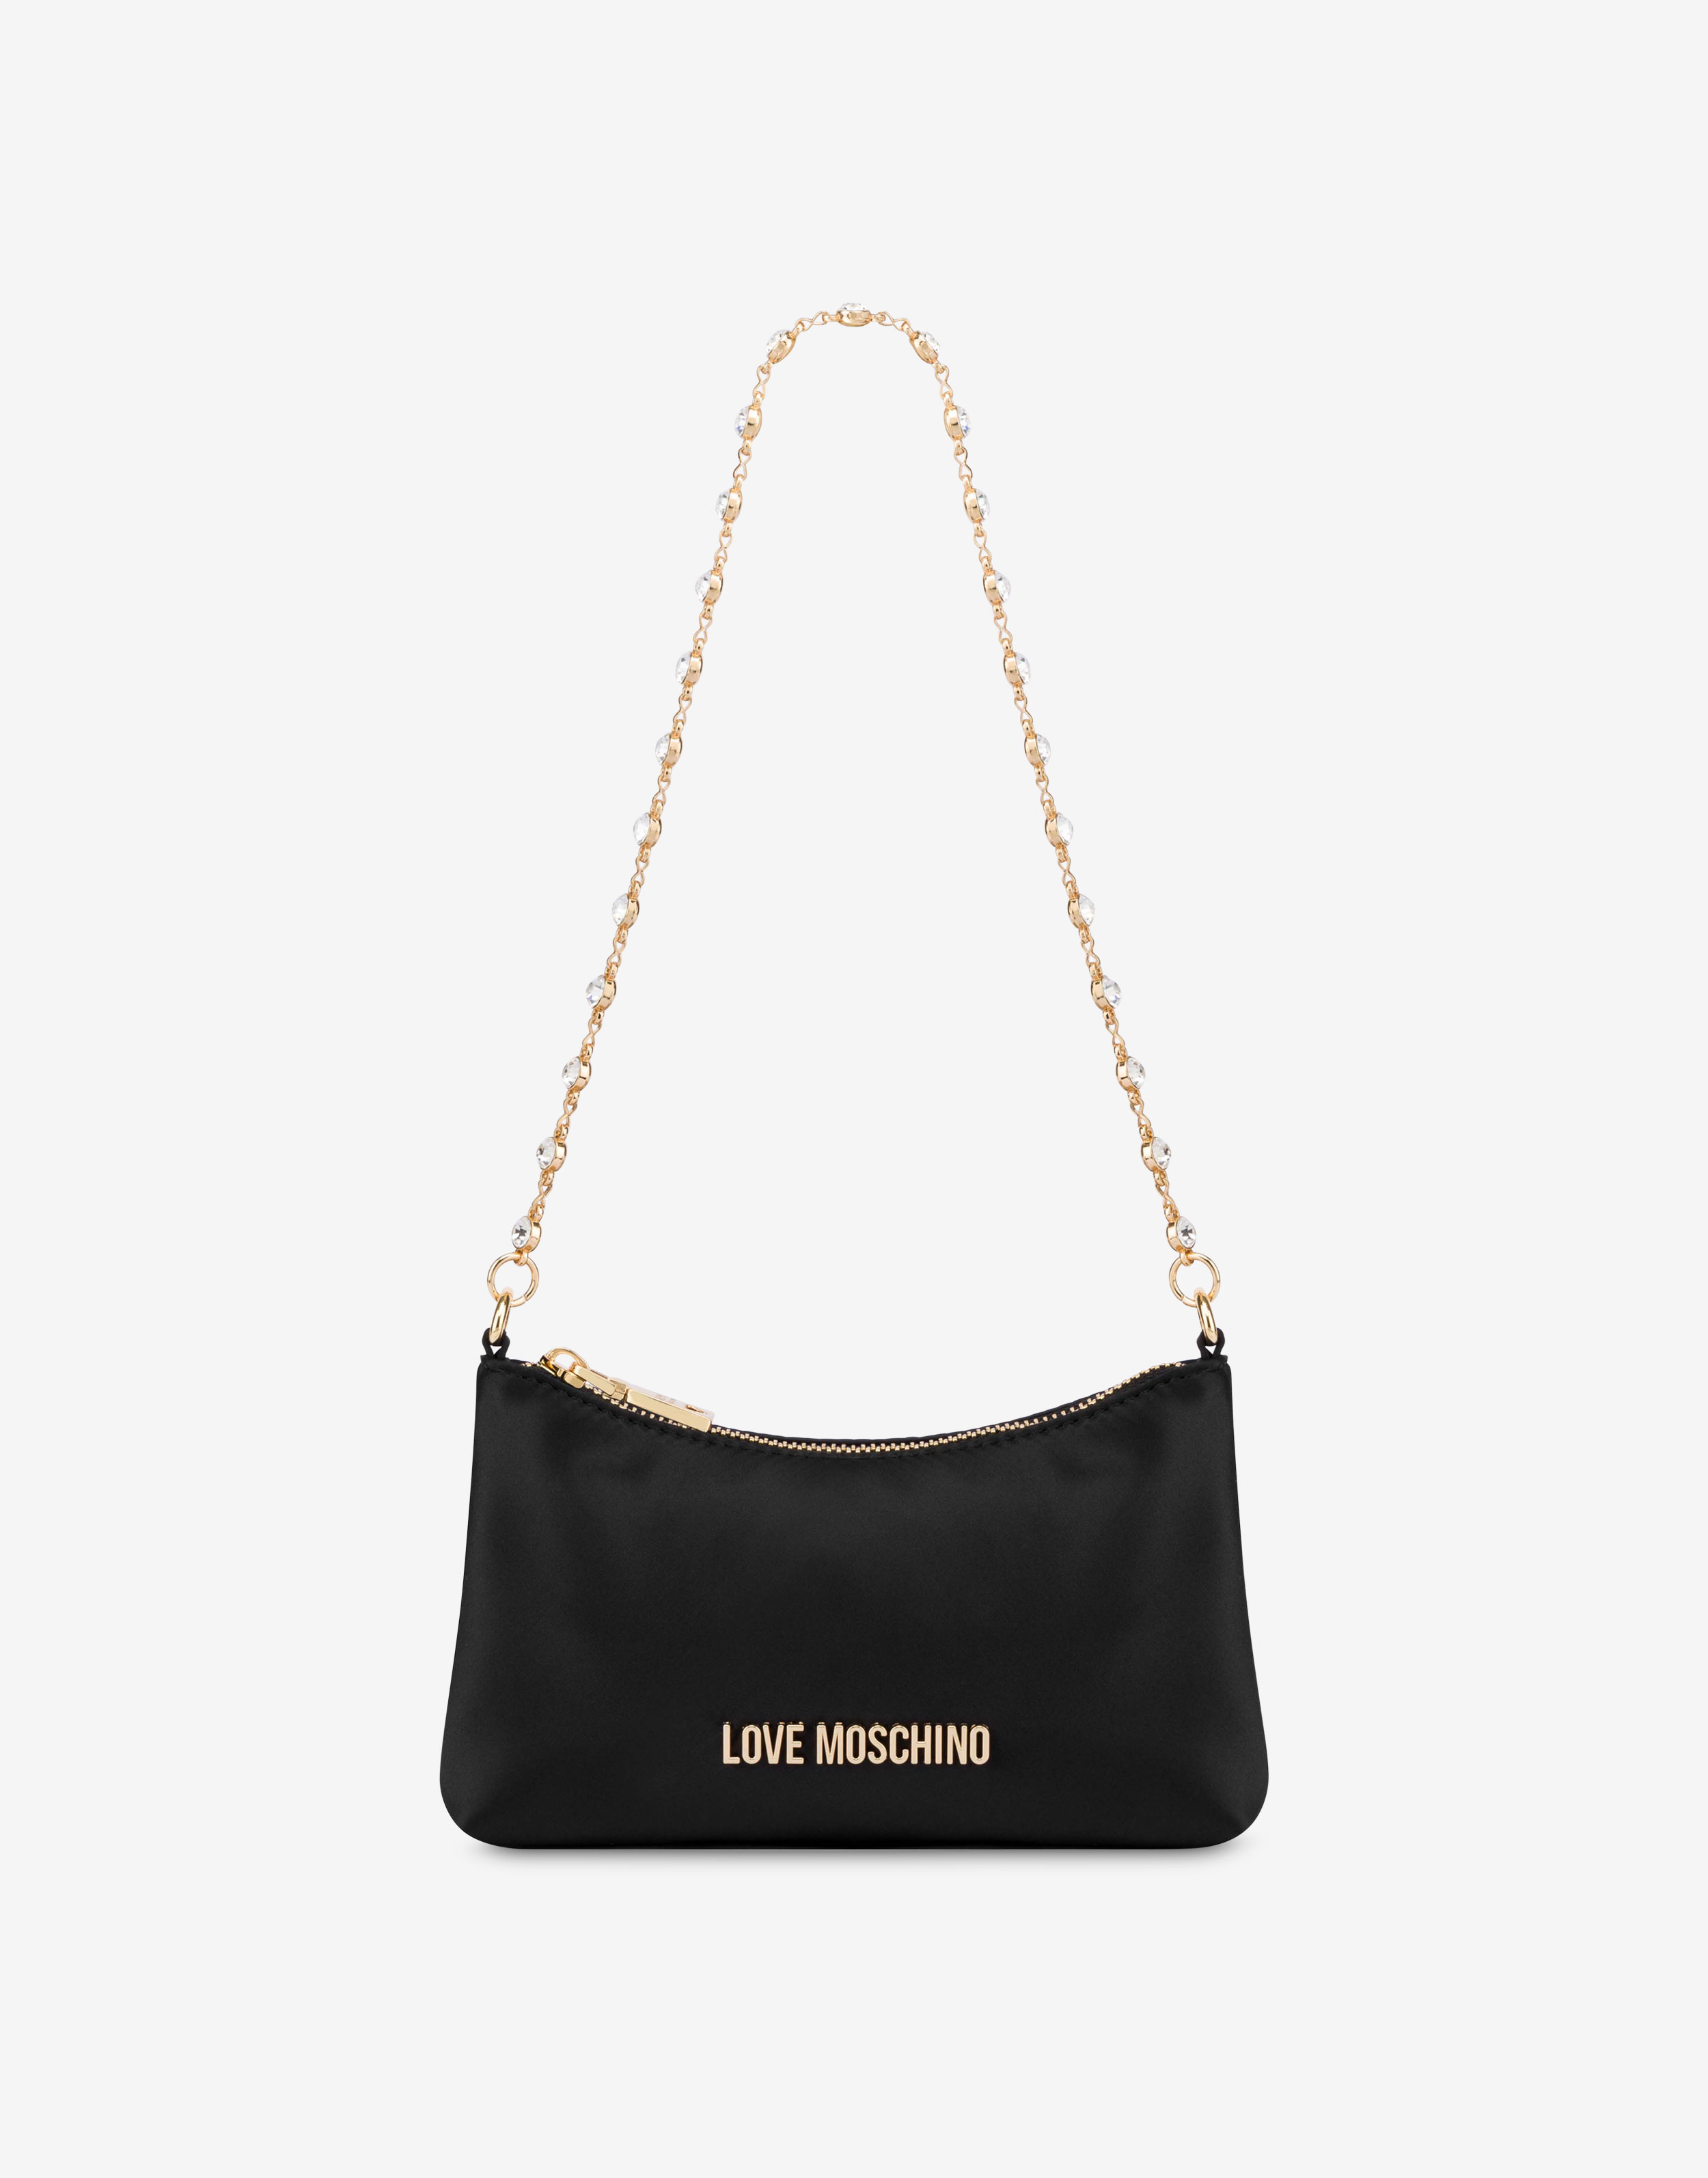 Latest Moschino Bags & Handbags arrivals - Kids - 3 products | FASHIOLA  INDIA